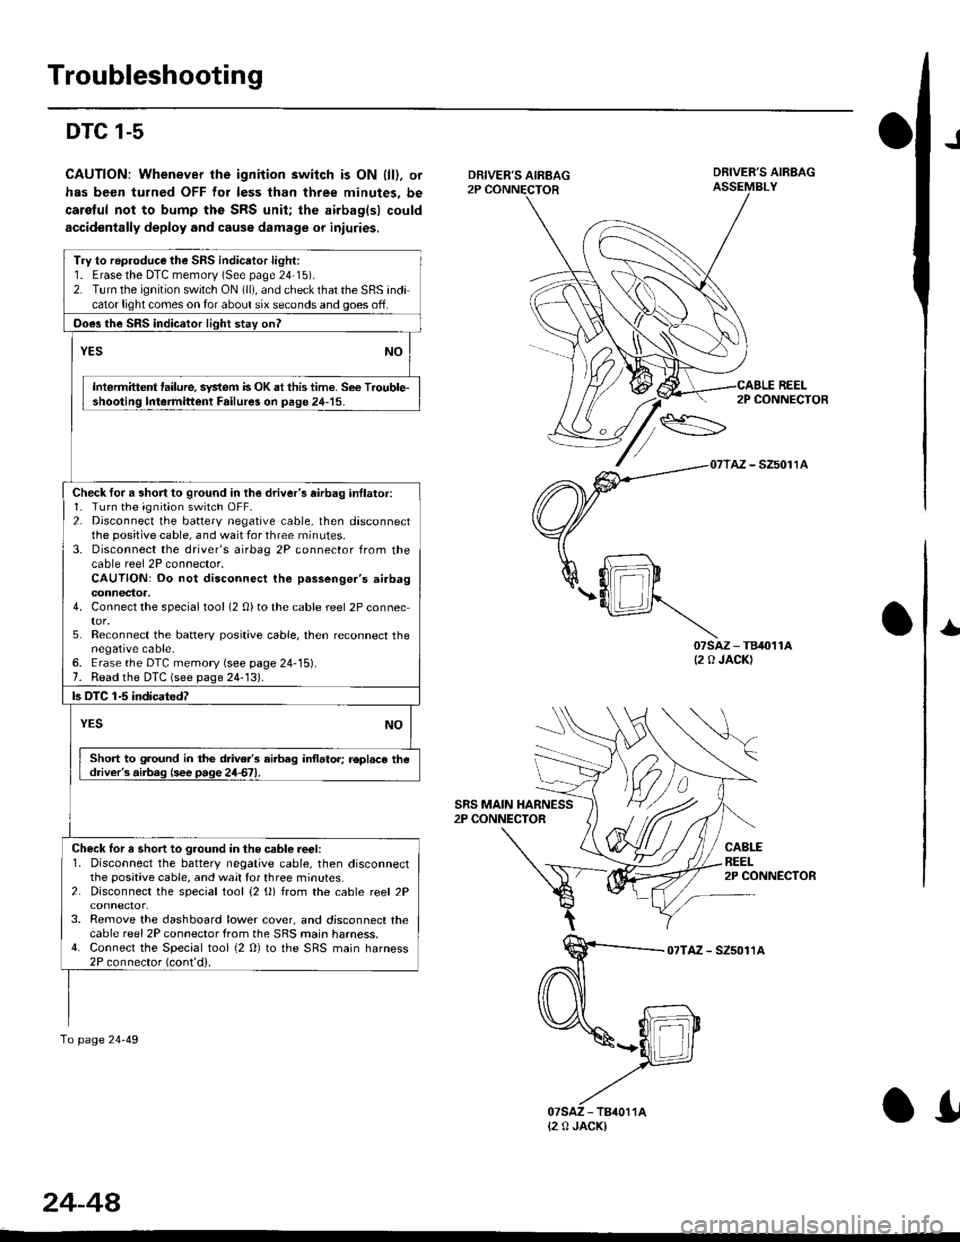 HONDA CIVIC 1996 6.G Service Manual Troubleshooting
DTC 1-5
CAUTION: Whenever the ignition switch is ON {ll). or
has been turned OFF for less than three minutes, be
caretul not to bump ths SRS unit; the airbag(sl could
accidentally depl